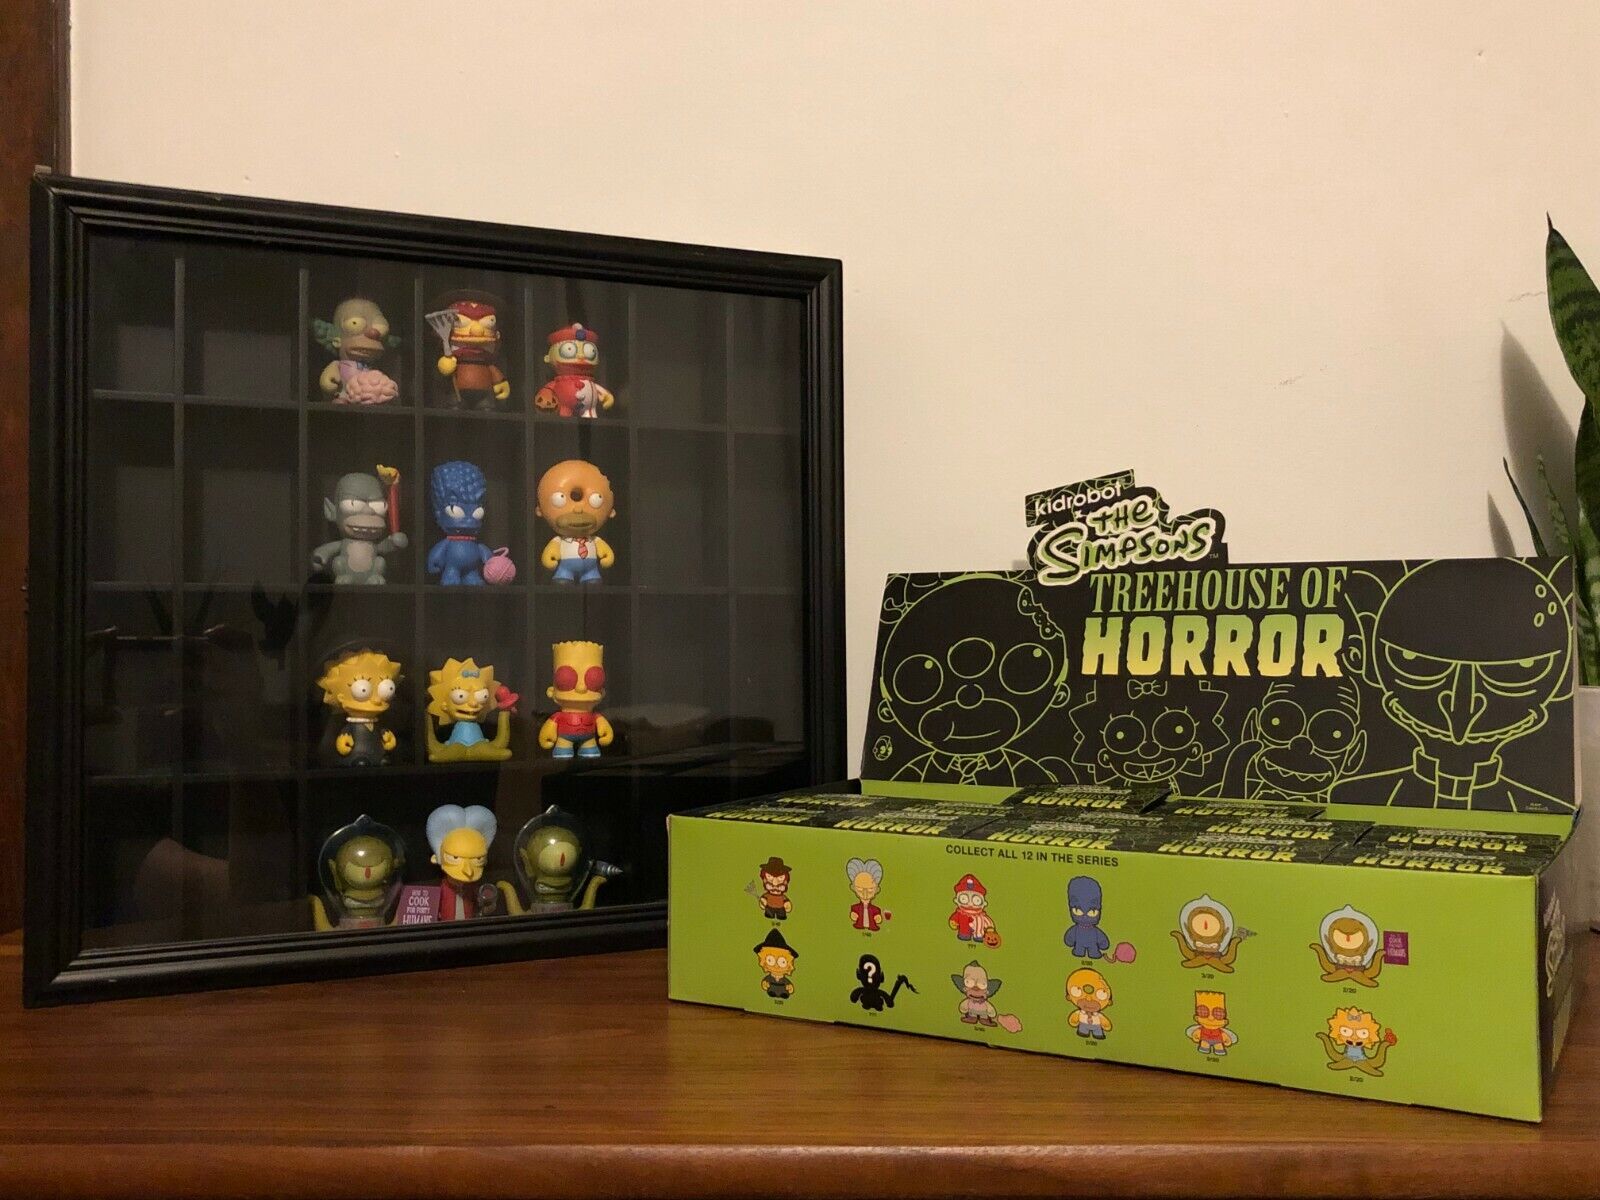 Kidrobot x The Simpsons - Treehouse Of Horror Set All 12 Figures, Display Case